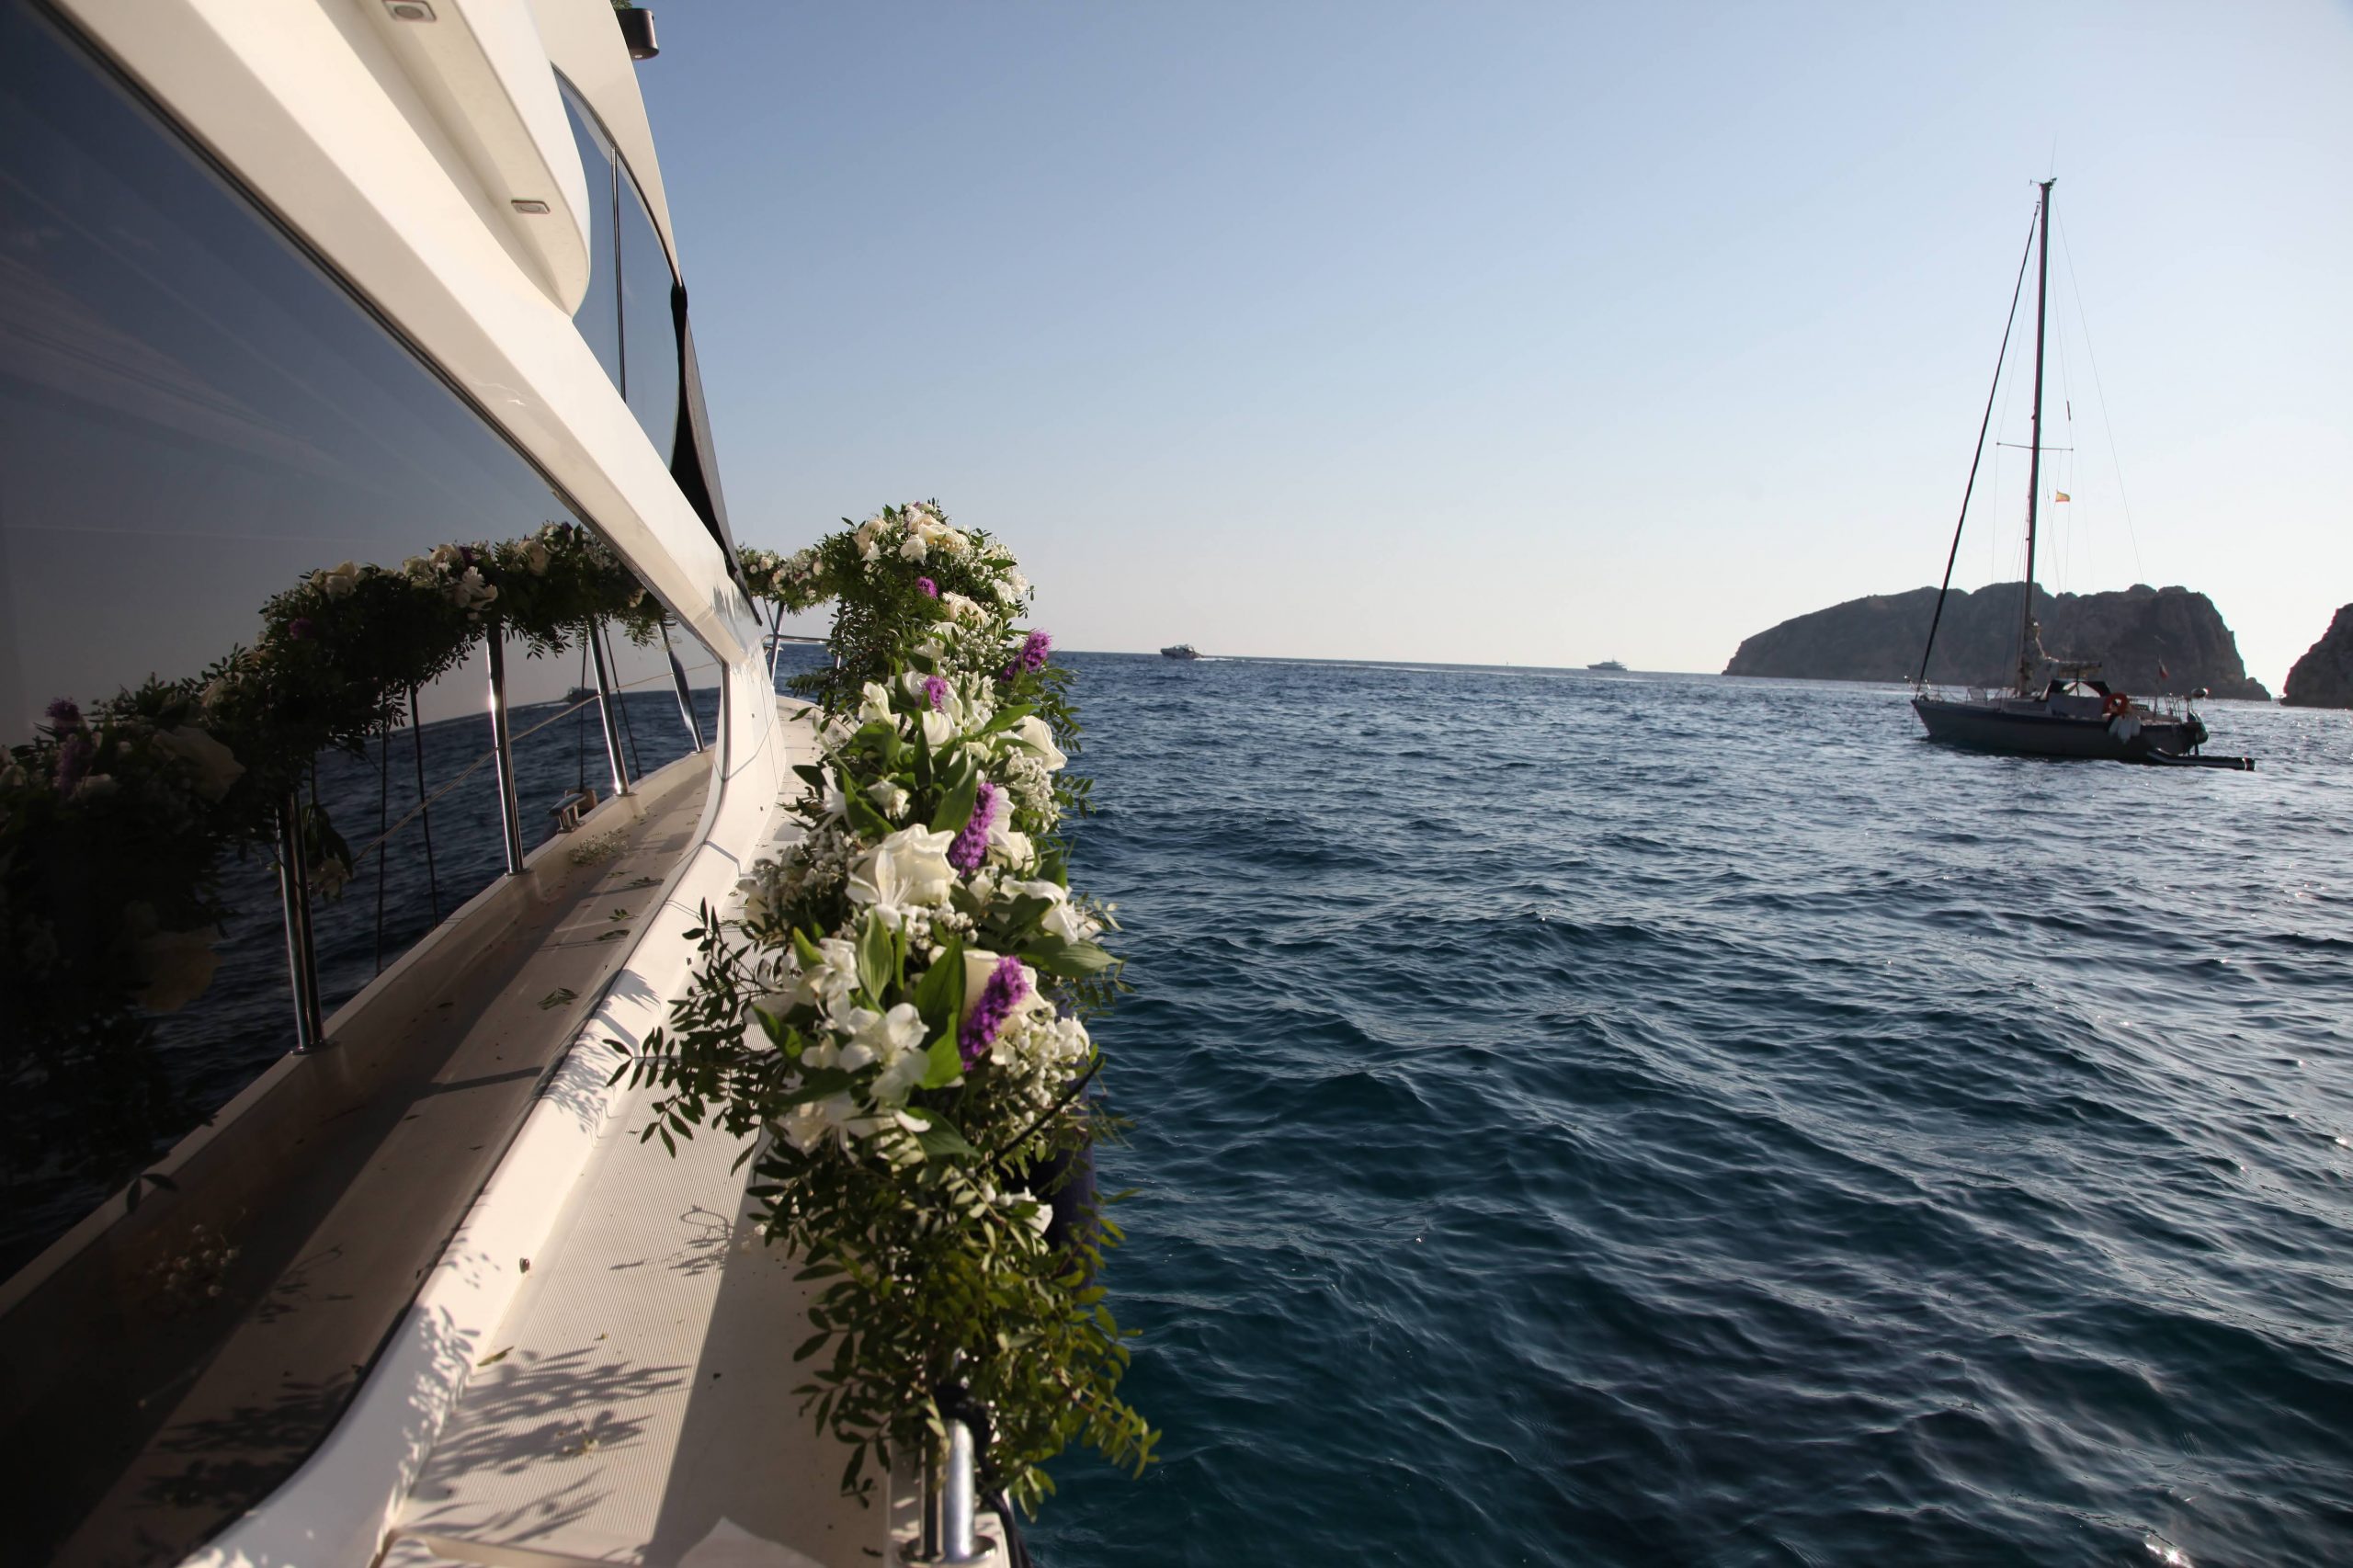 Flowers on the yacht